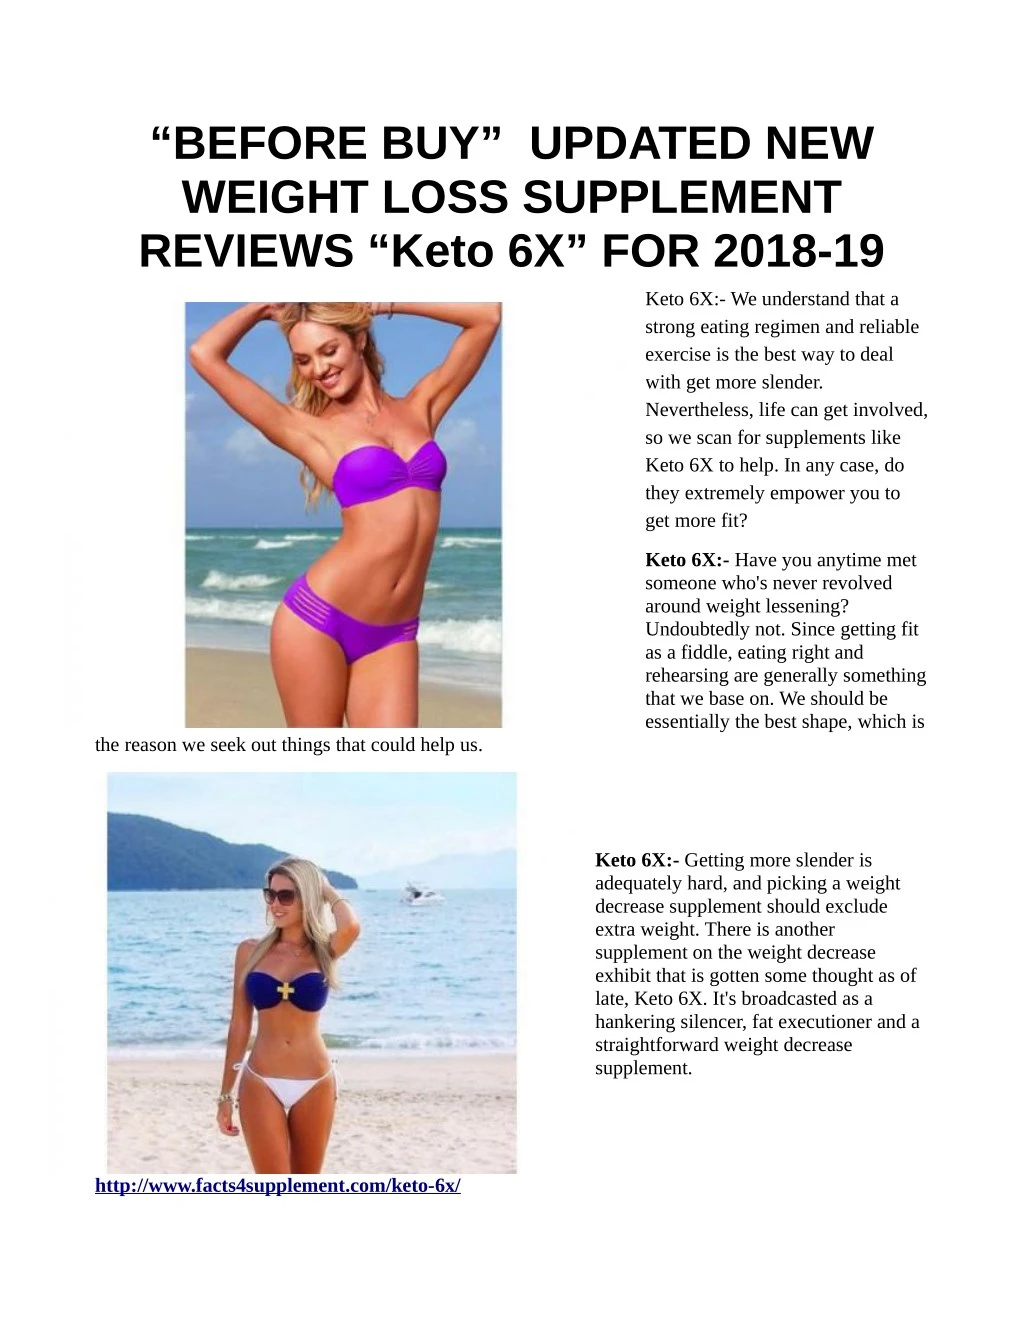 before buy updated new weight loss supplement